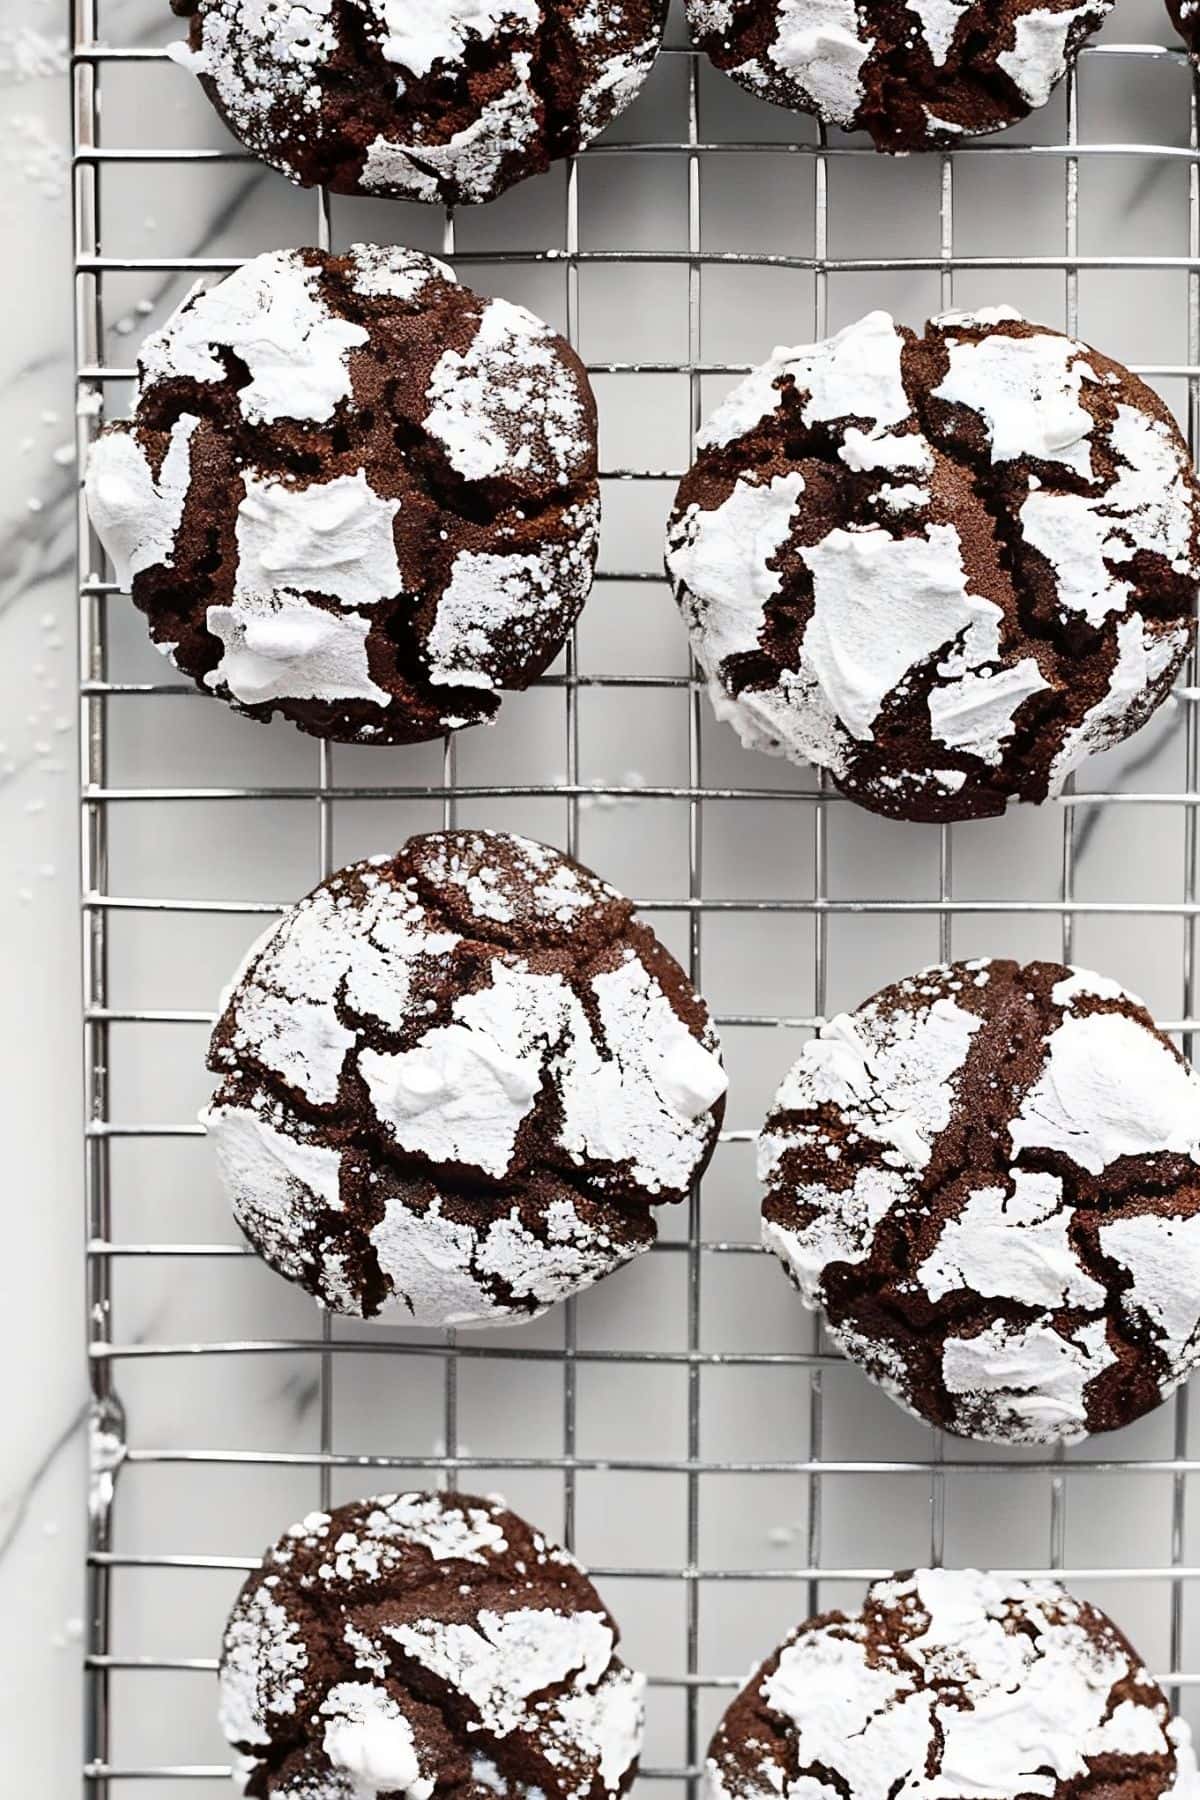 Chocolate Crinkle Cookies Cooling on a Wire Rack Over a White Marble Table